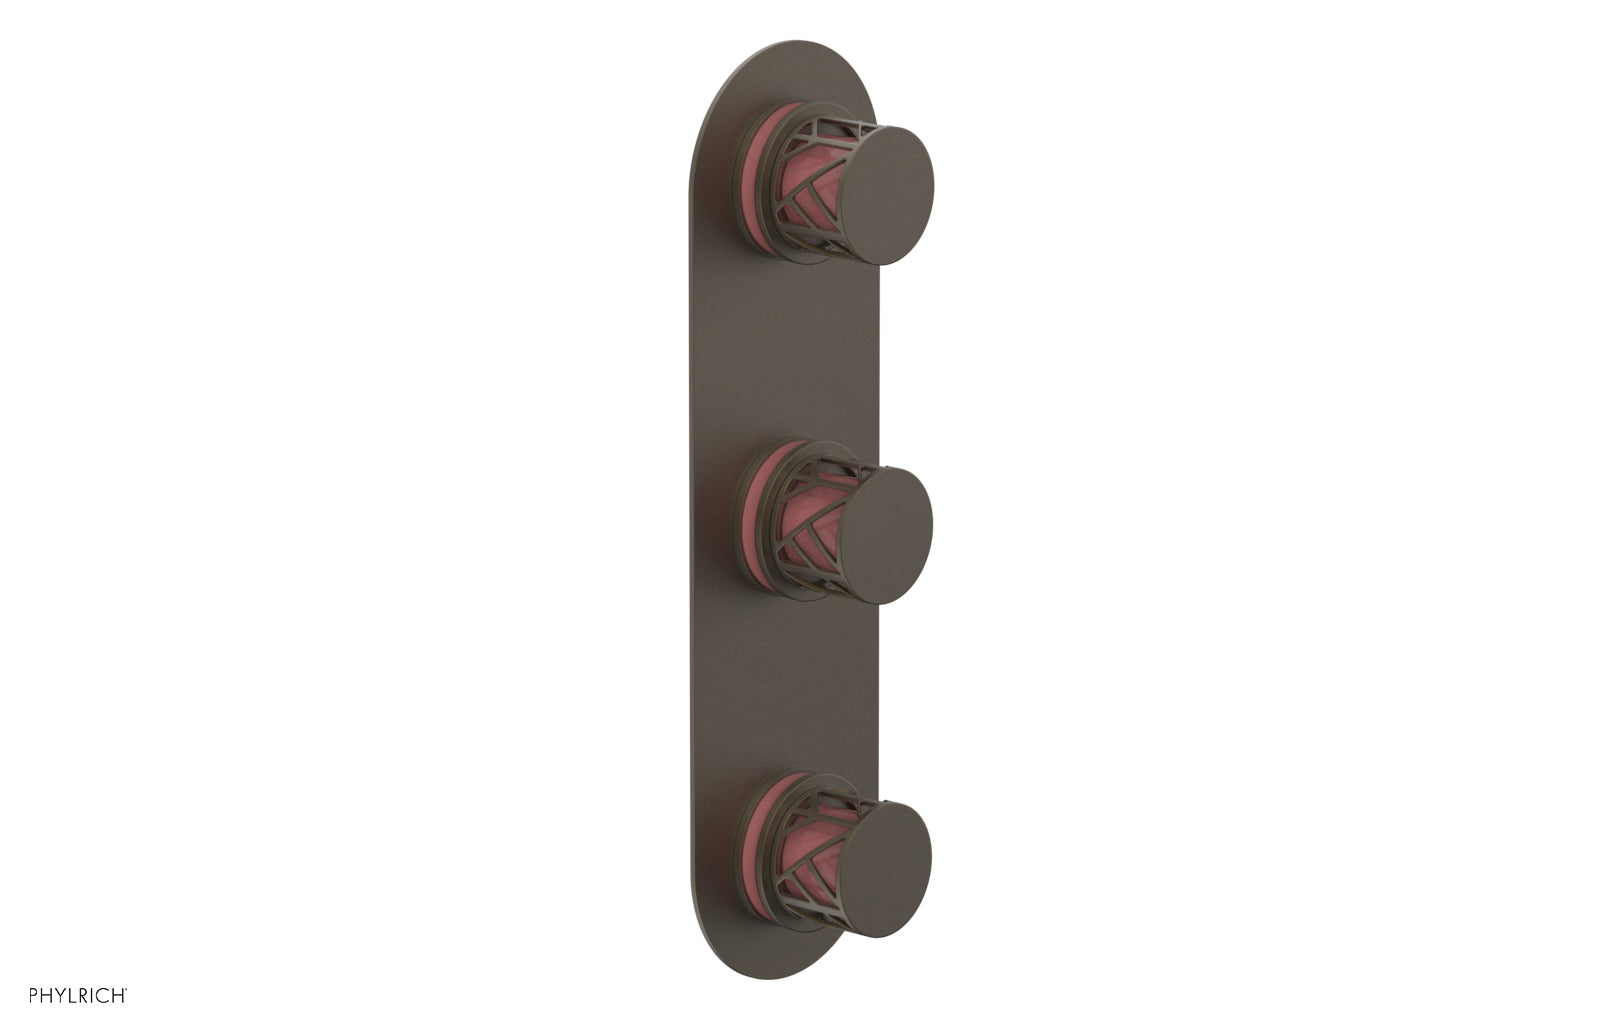 Phylrich JOLIE Thermostatic Valve with Two Volume Control with "Pink" Accents